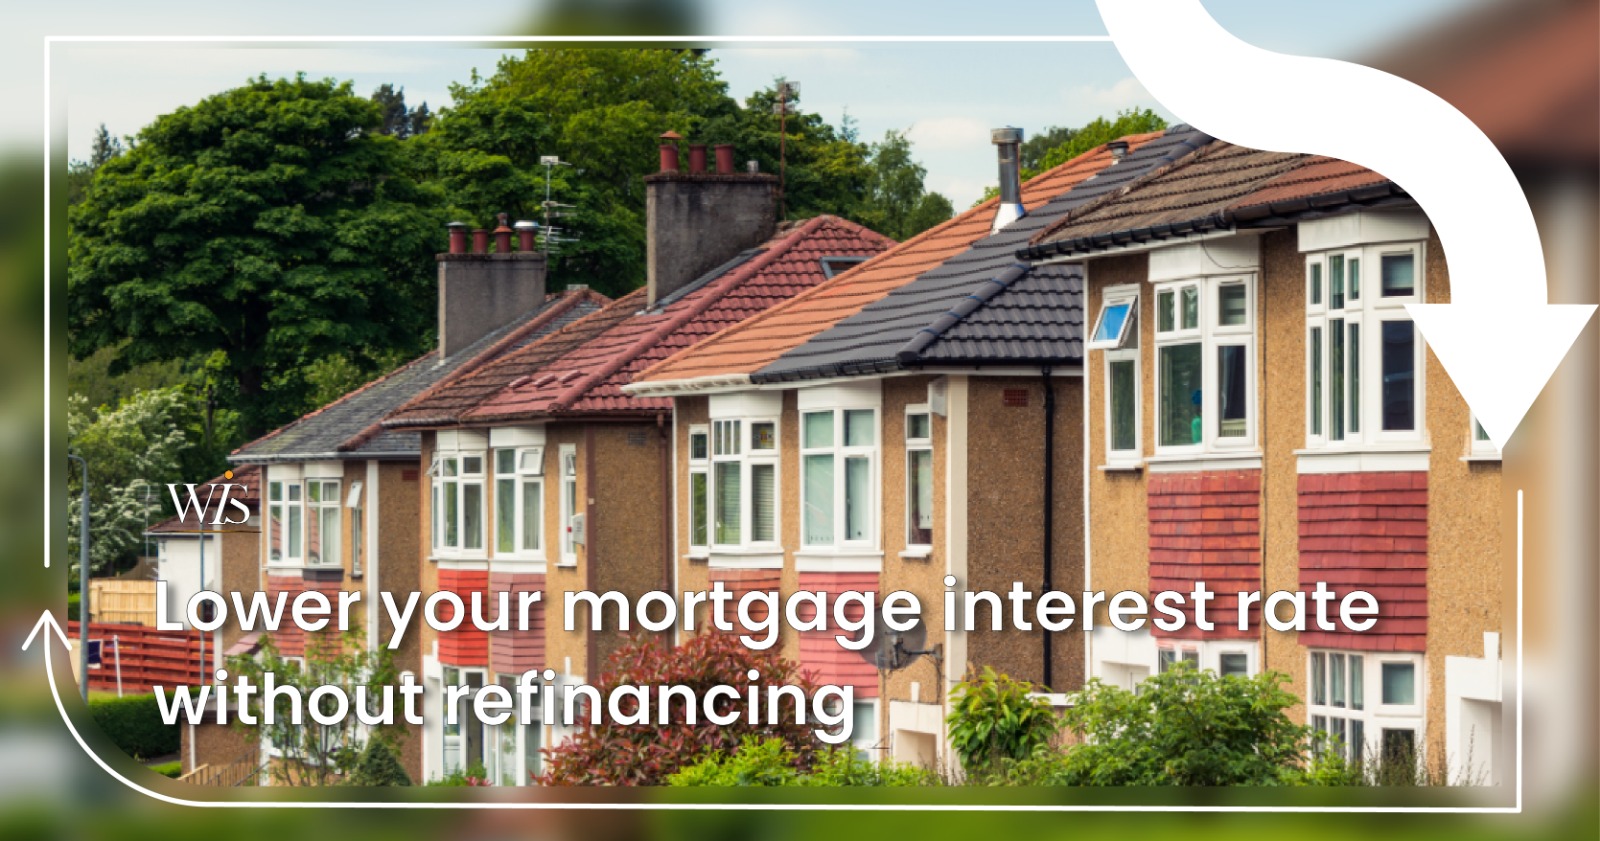 Lower your mortgage interest rate without refinancing  image